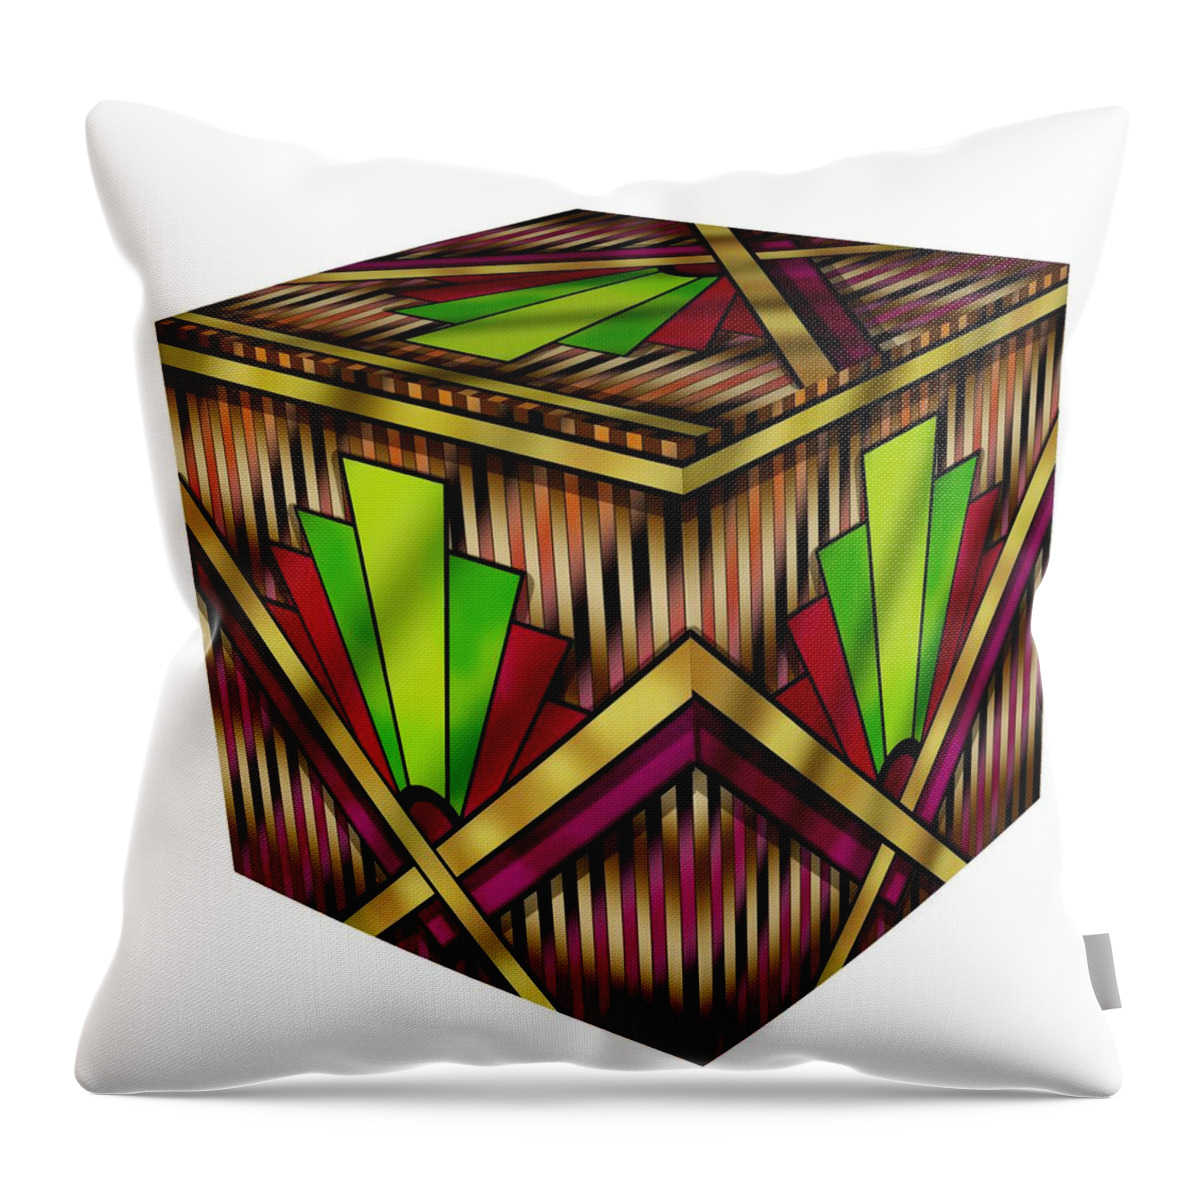 Art Deco 13 Cube Throw Pillow featuring the digital art Art Deco 13 Cube by Chuck Staley